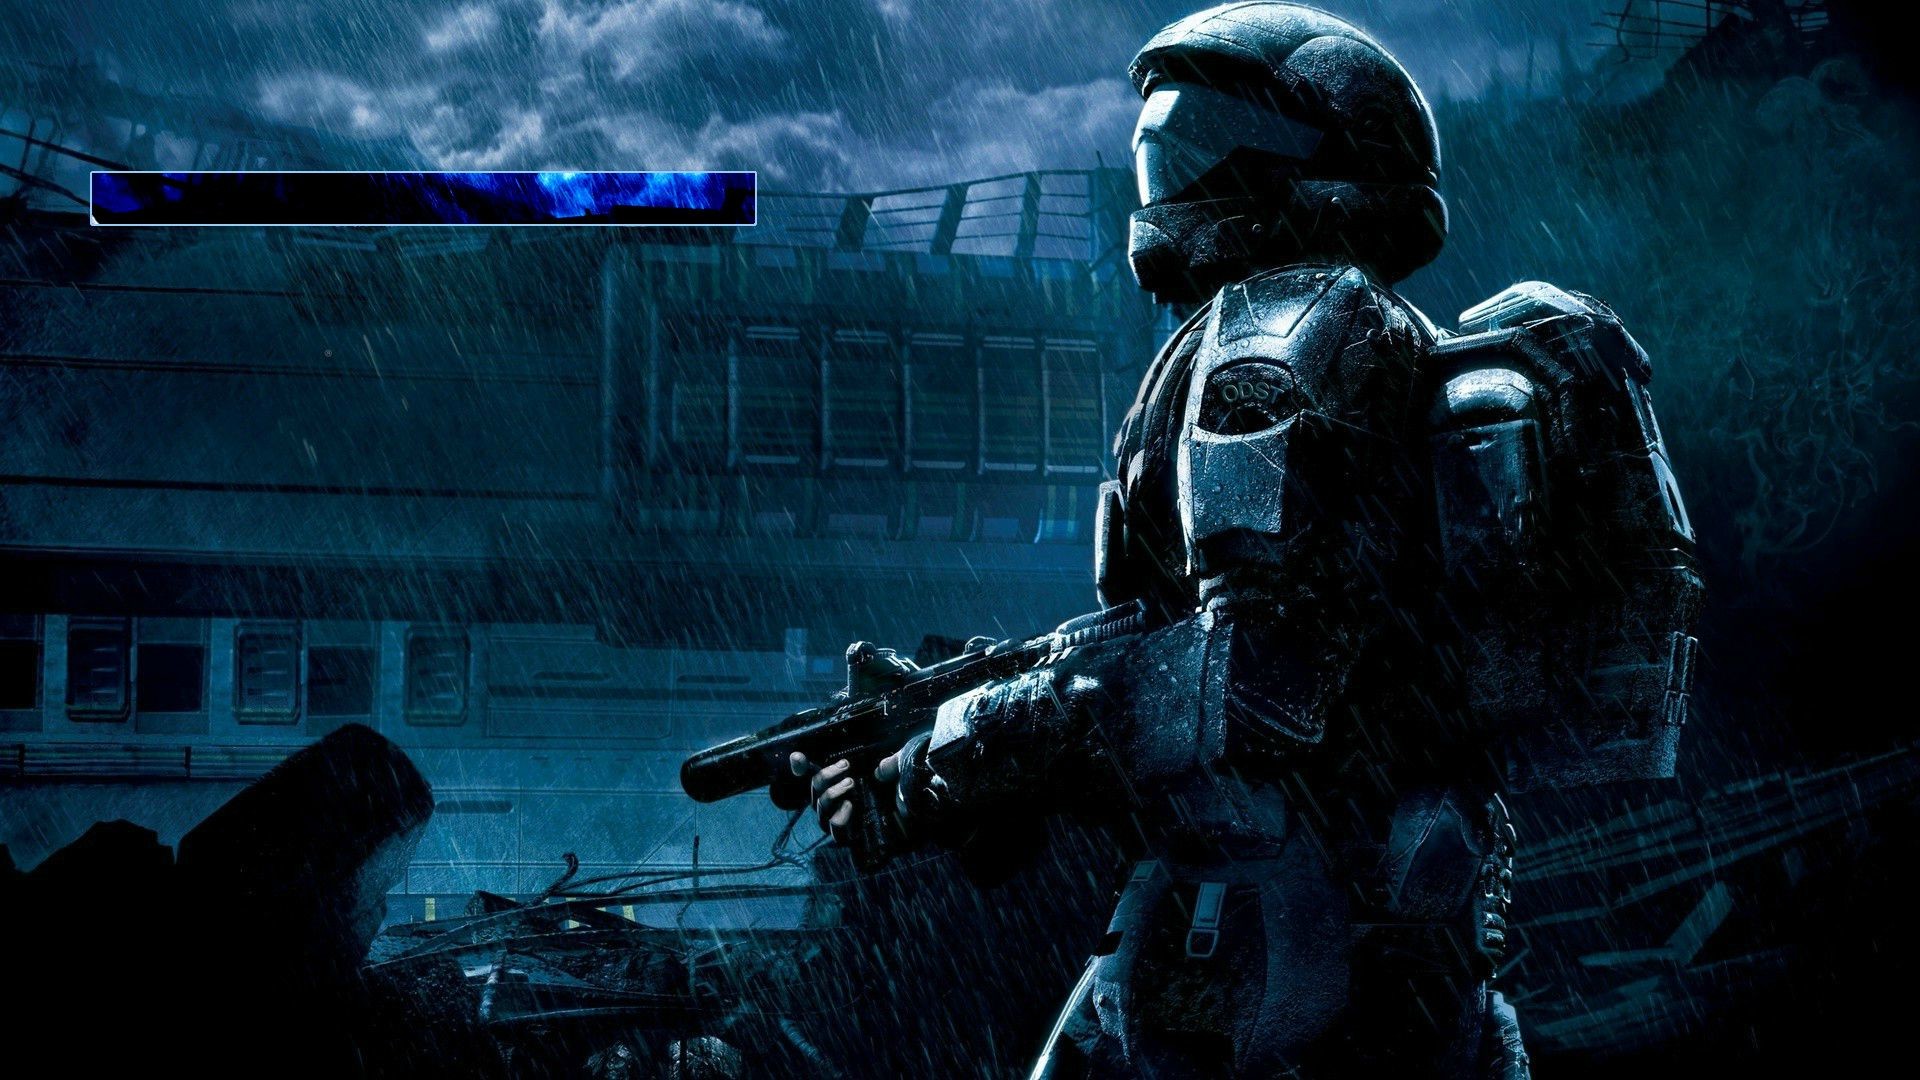 1920x1080 ... Halo 3 Wallpapers, Incredible Backgrounds of Halo 3 High Quality .